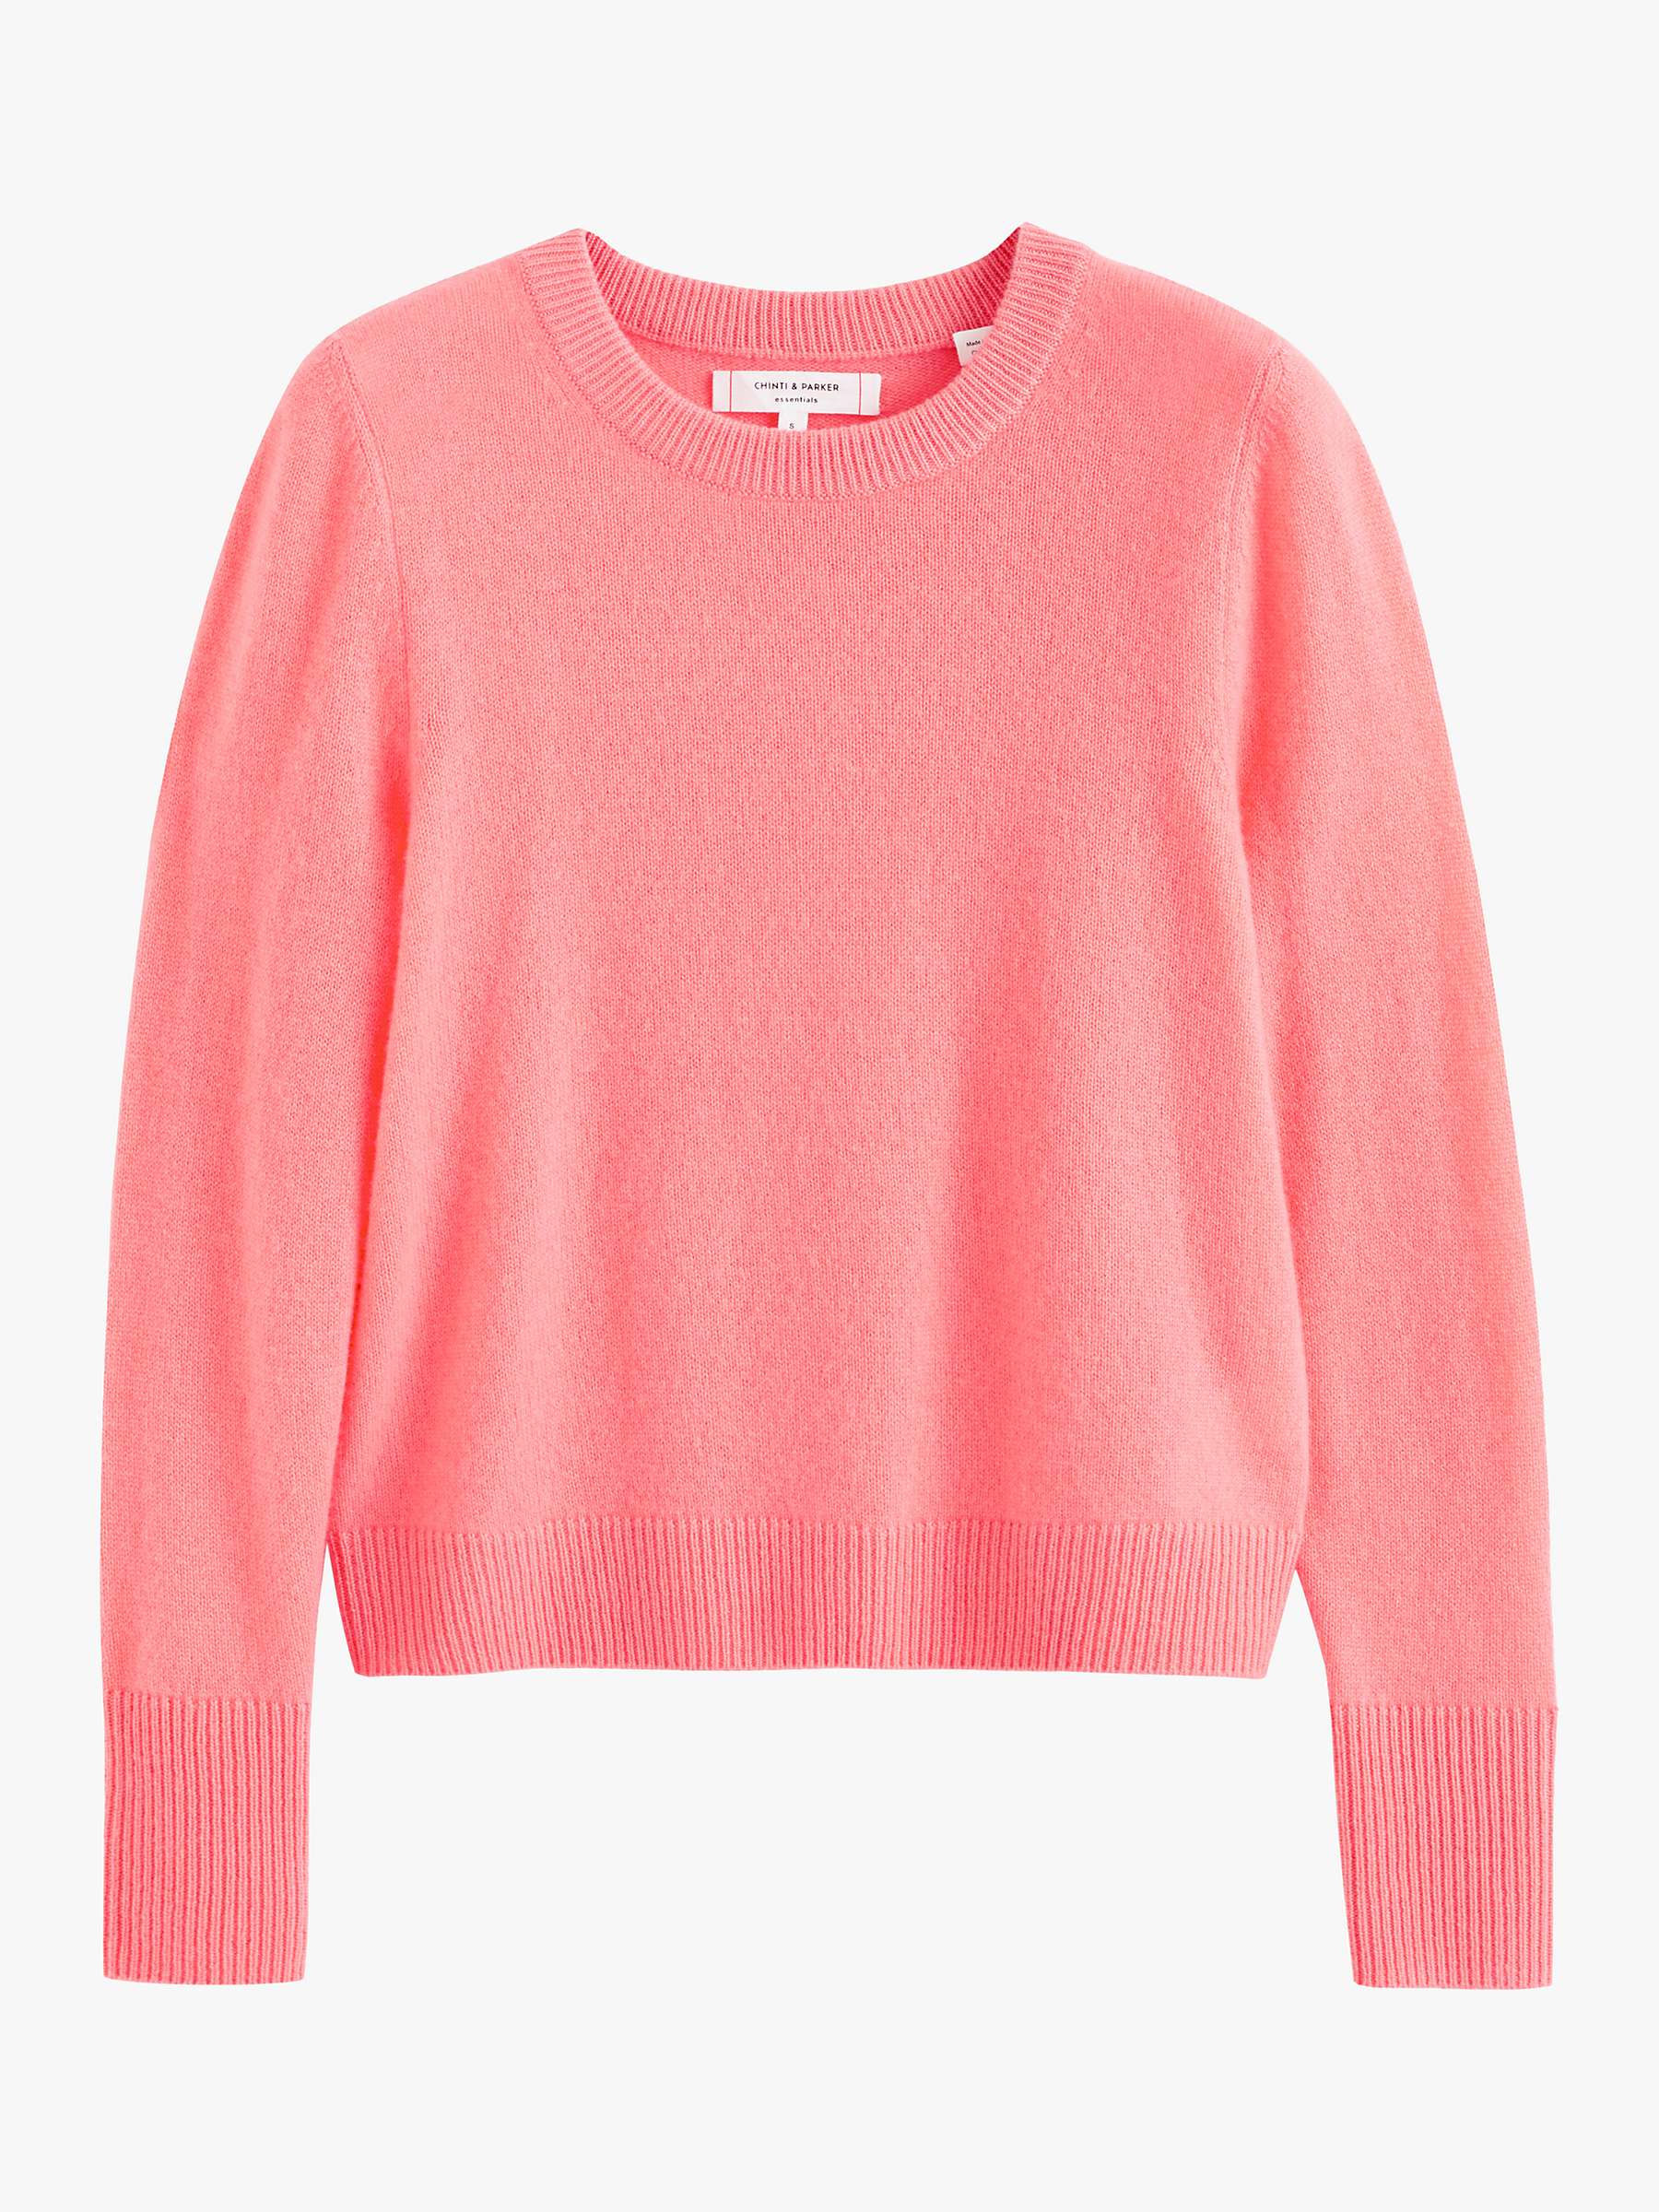 Buy Chinti & Parker Cropped Cashmere Jumper Online at johnlewis.com